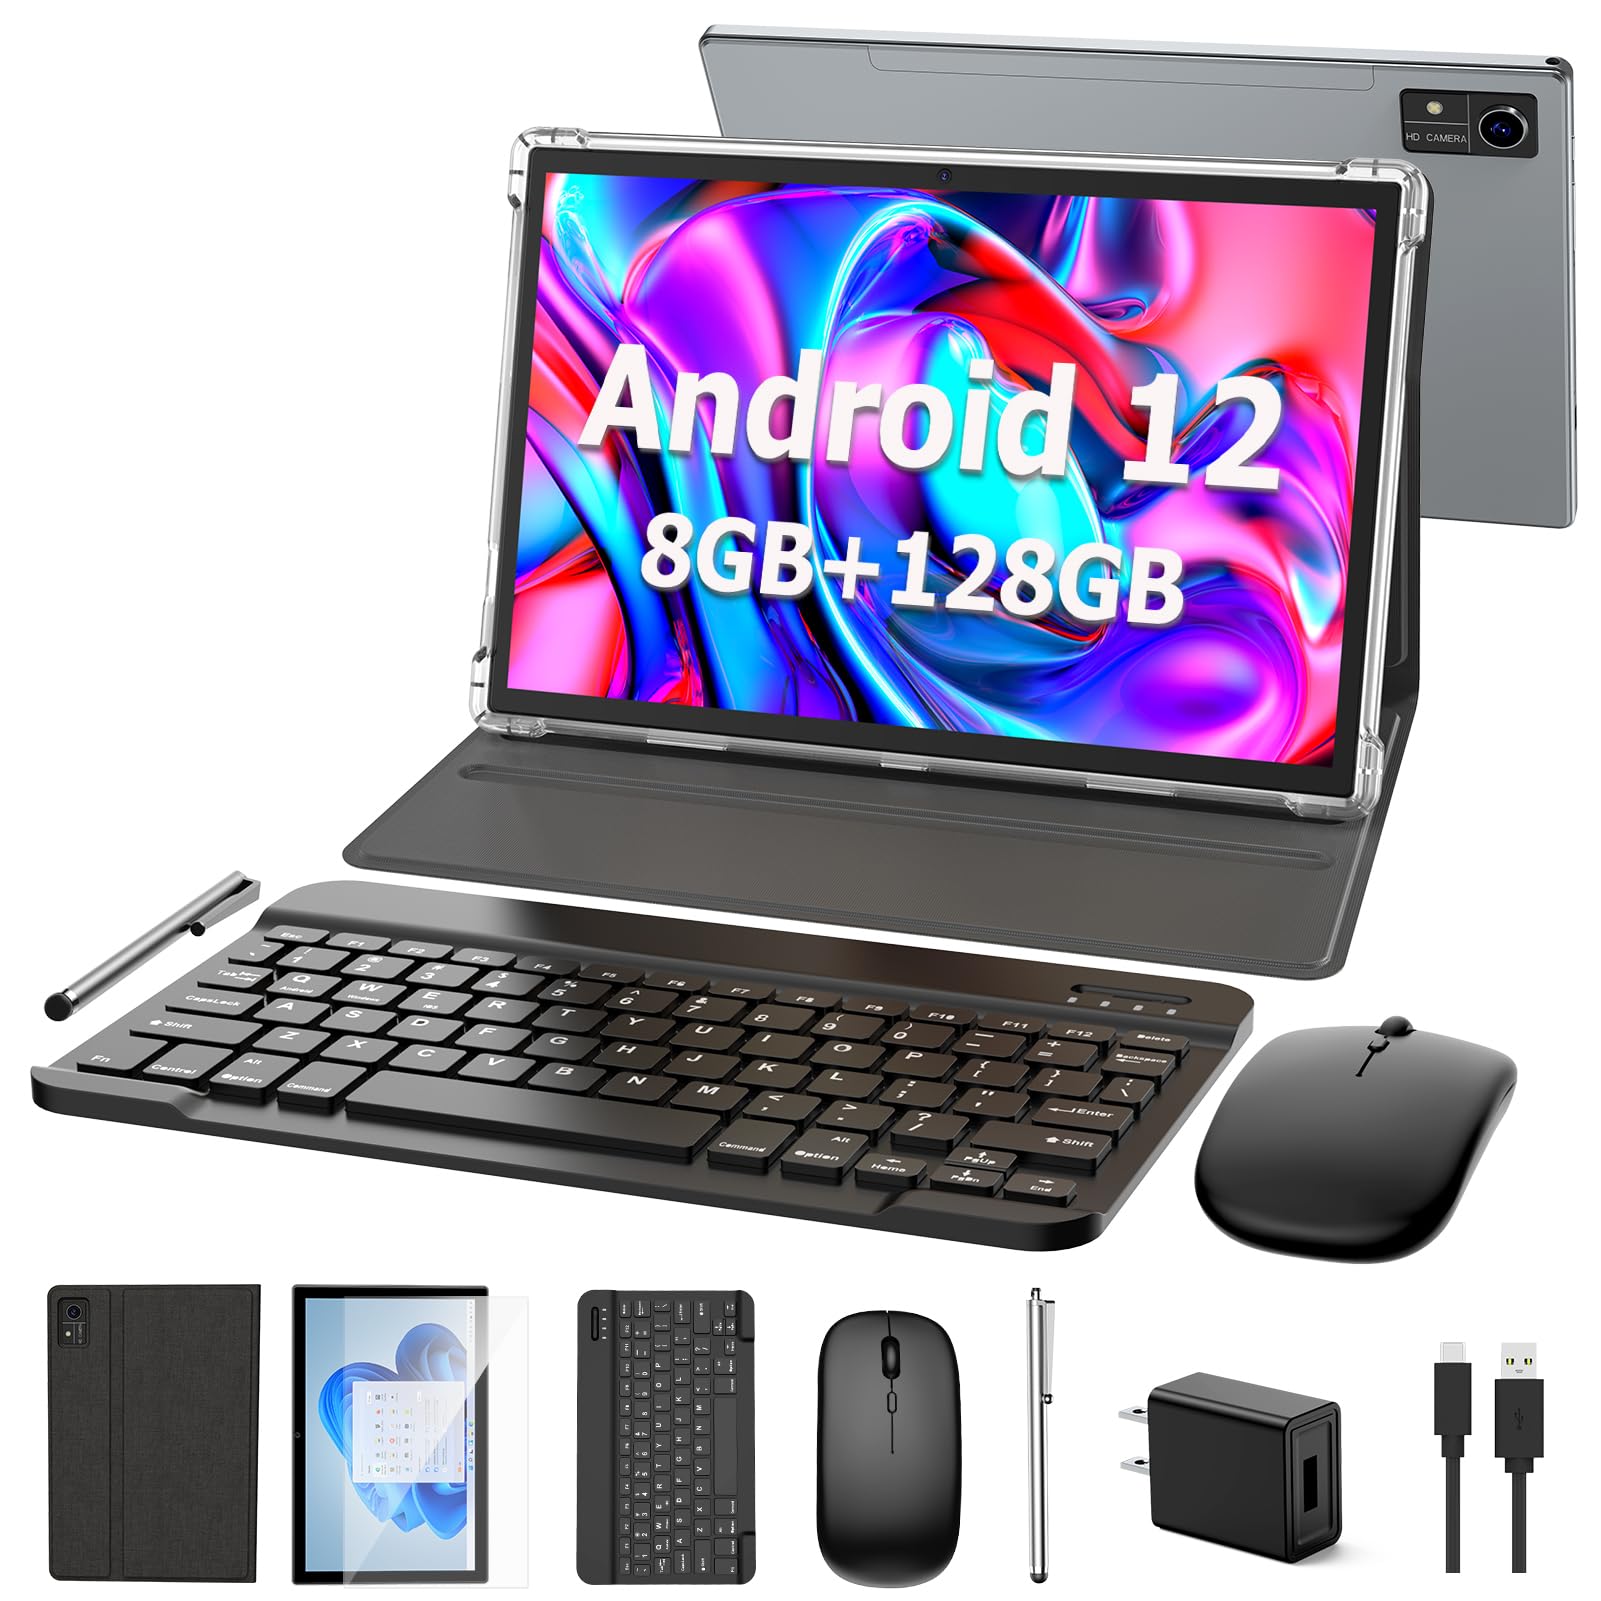 YOBANSE Android Tablet 10 inch, Android 12 Tablet, 8GB RAM 128GB ROM,1TB Expand, 5G WiFi, 4G/LTE, Bluetooth, 8000mAh Battery, GMS Certified, 2 in 1 Tablet with Keyboard, Mouse, Case, Stylus(Black)